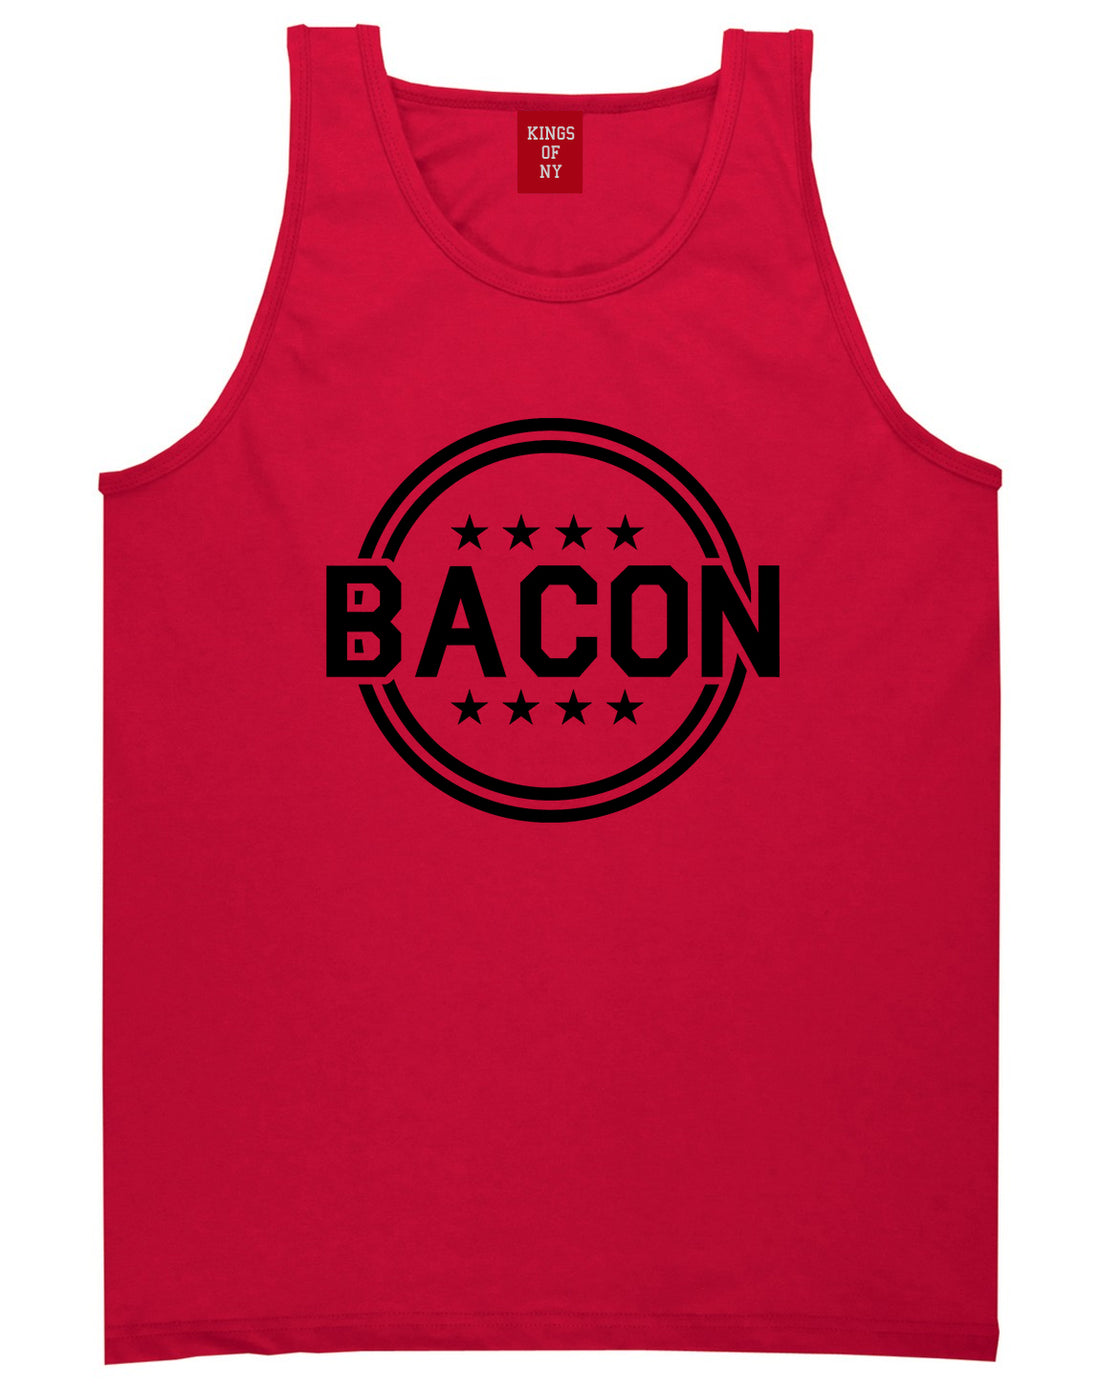 Bacon Stars Red Tank Top Shirt by Kings Of NY